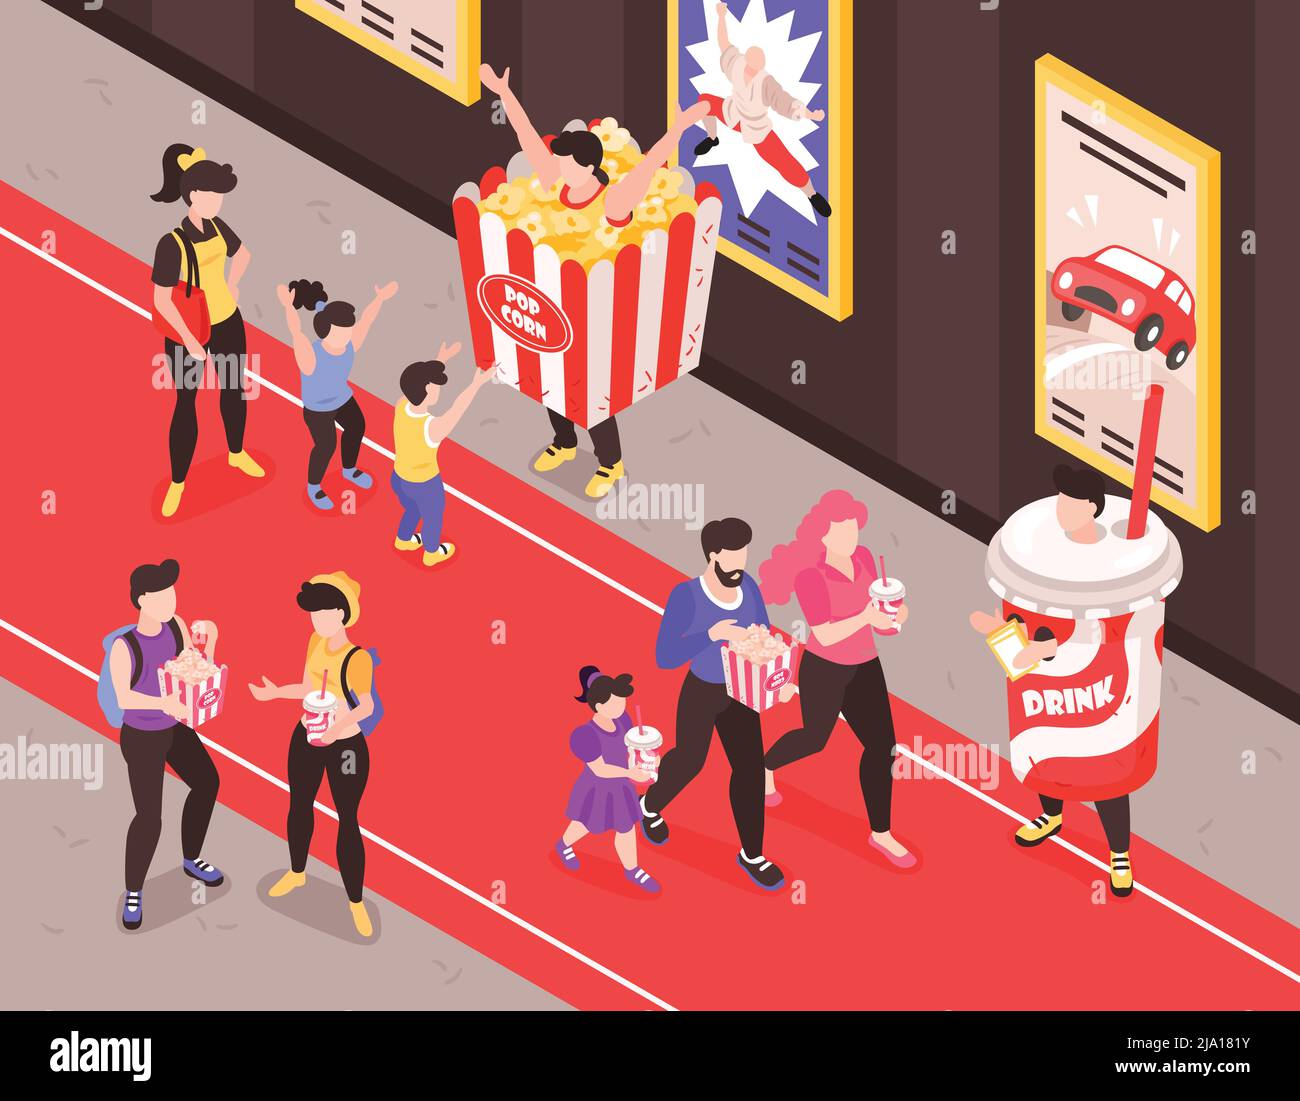 Fastfood promoters in snacks and soft drinks costumes approaching customers on red carpet isometric composition vector illustration Stock Vector